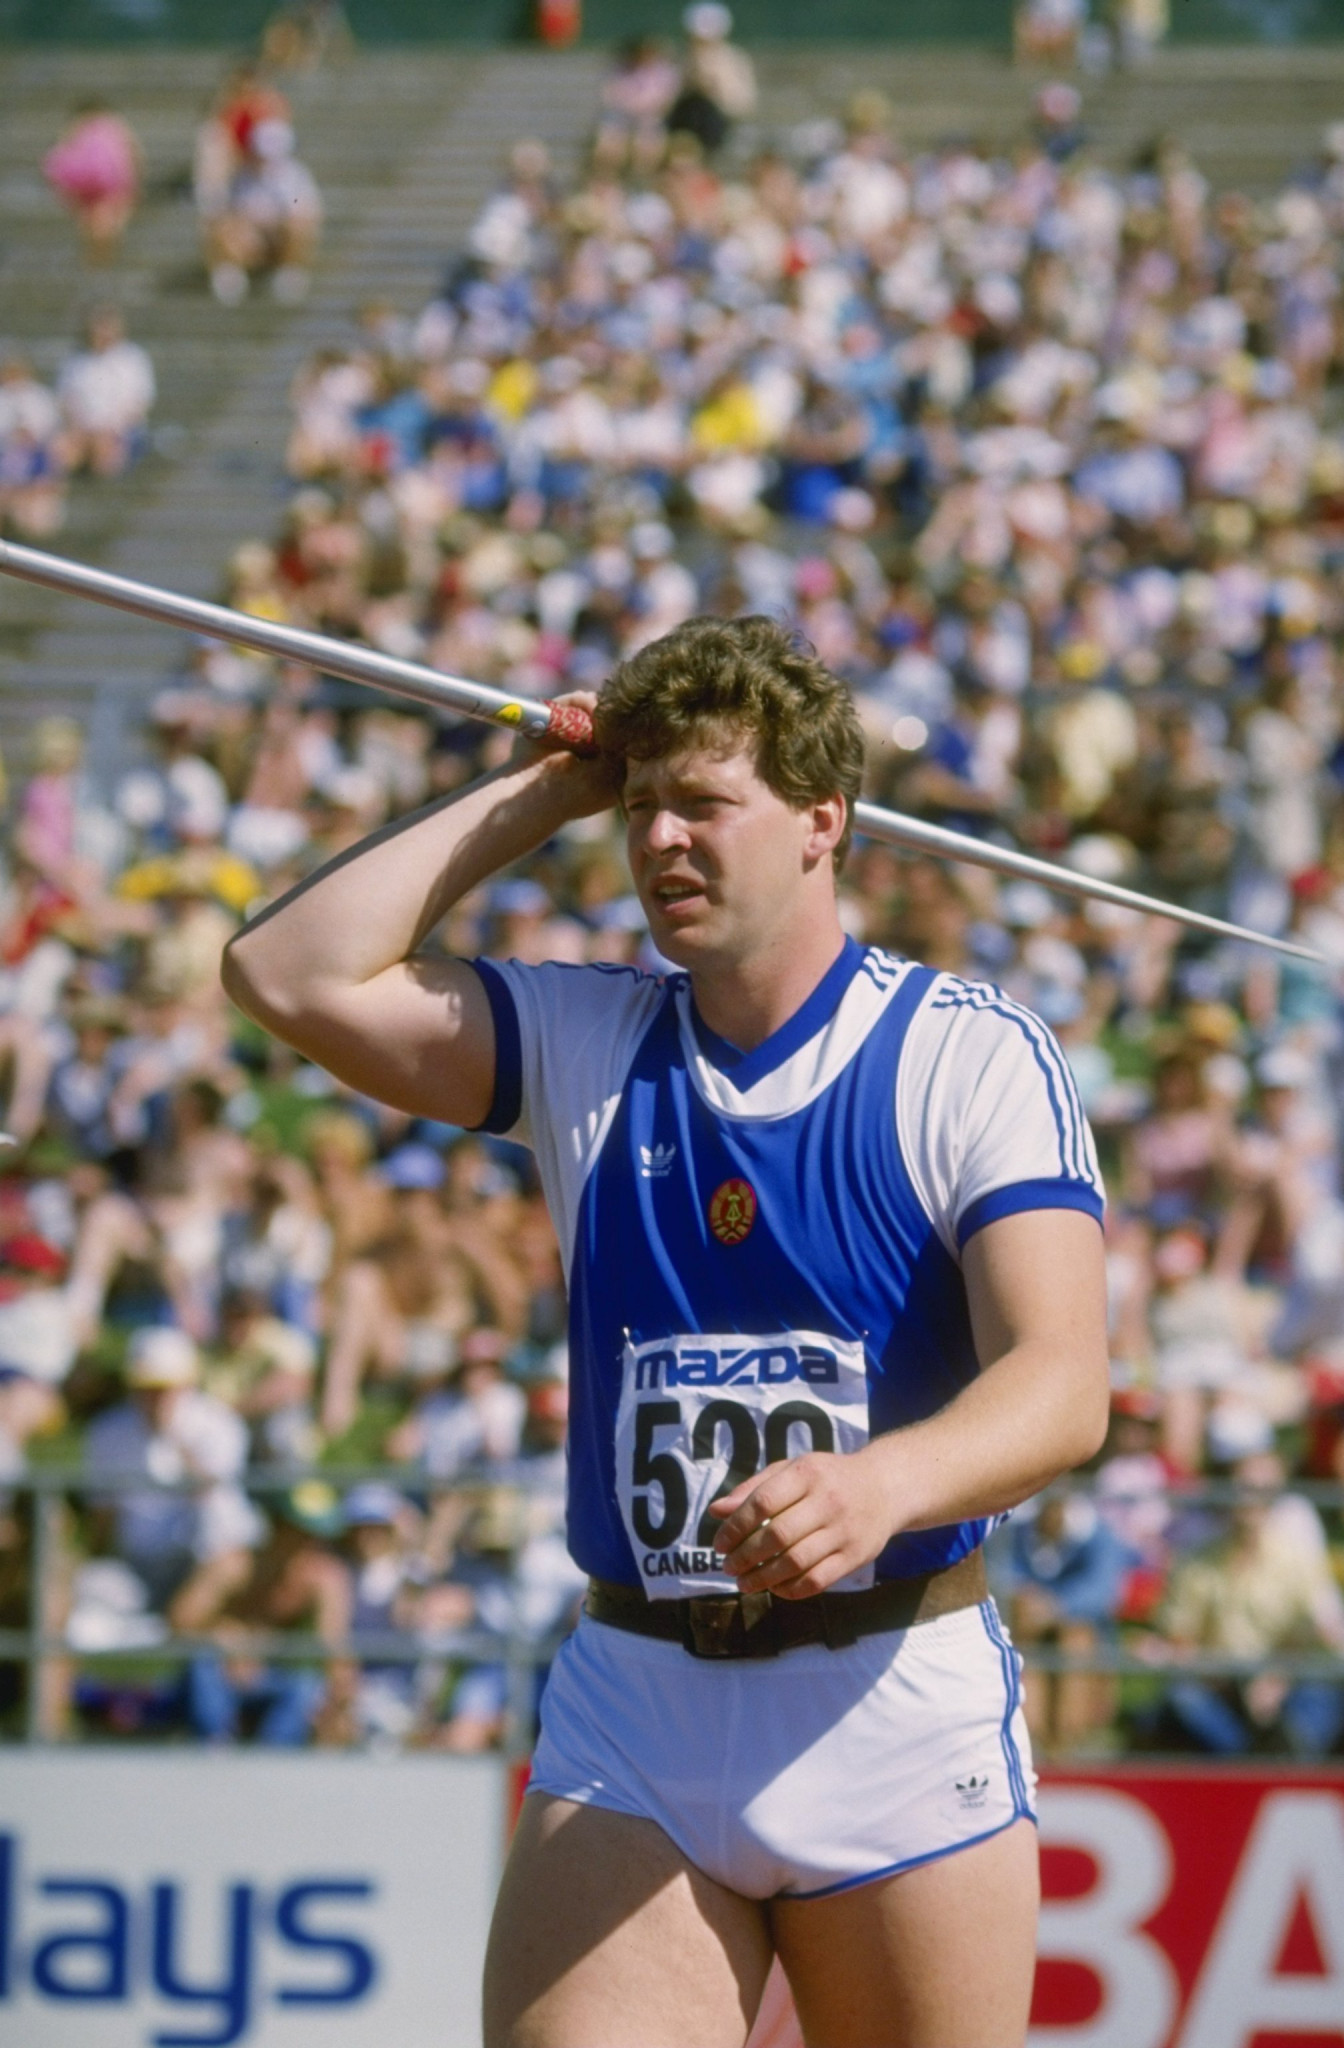 The world javelin record of 104.80 metres set by East Germany's Uwe Hohn in 1984 was not the tipping point for modification of the spear ©Getty Images